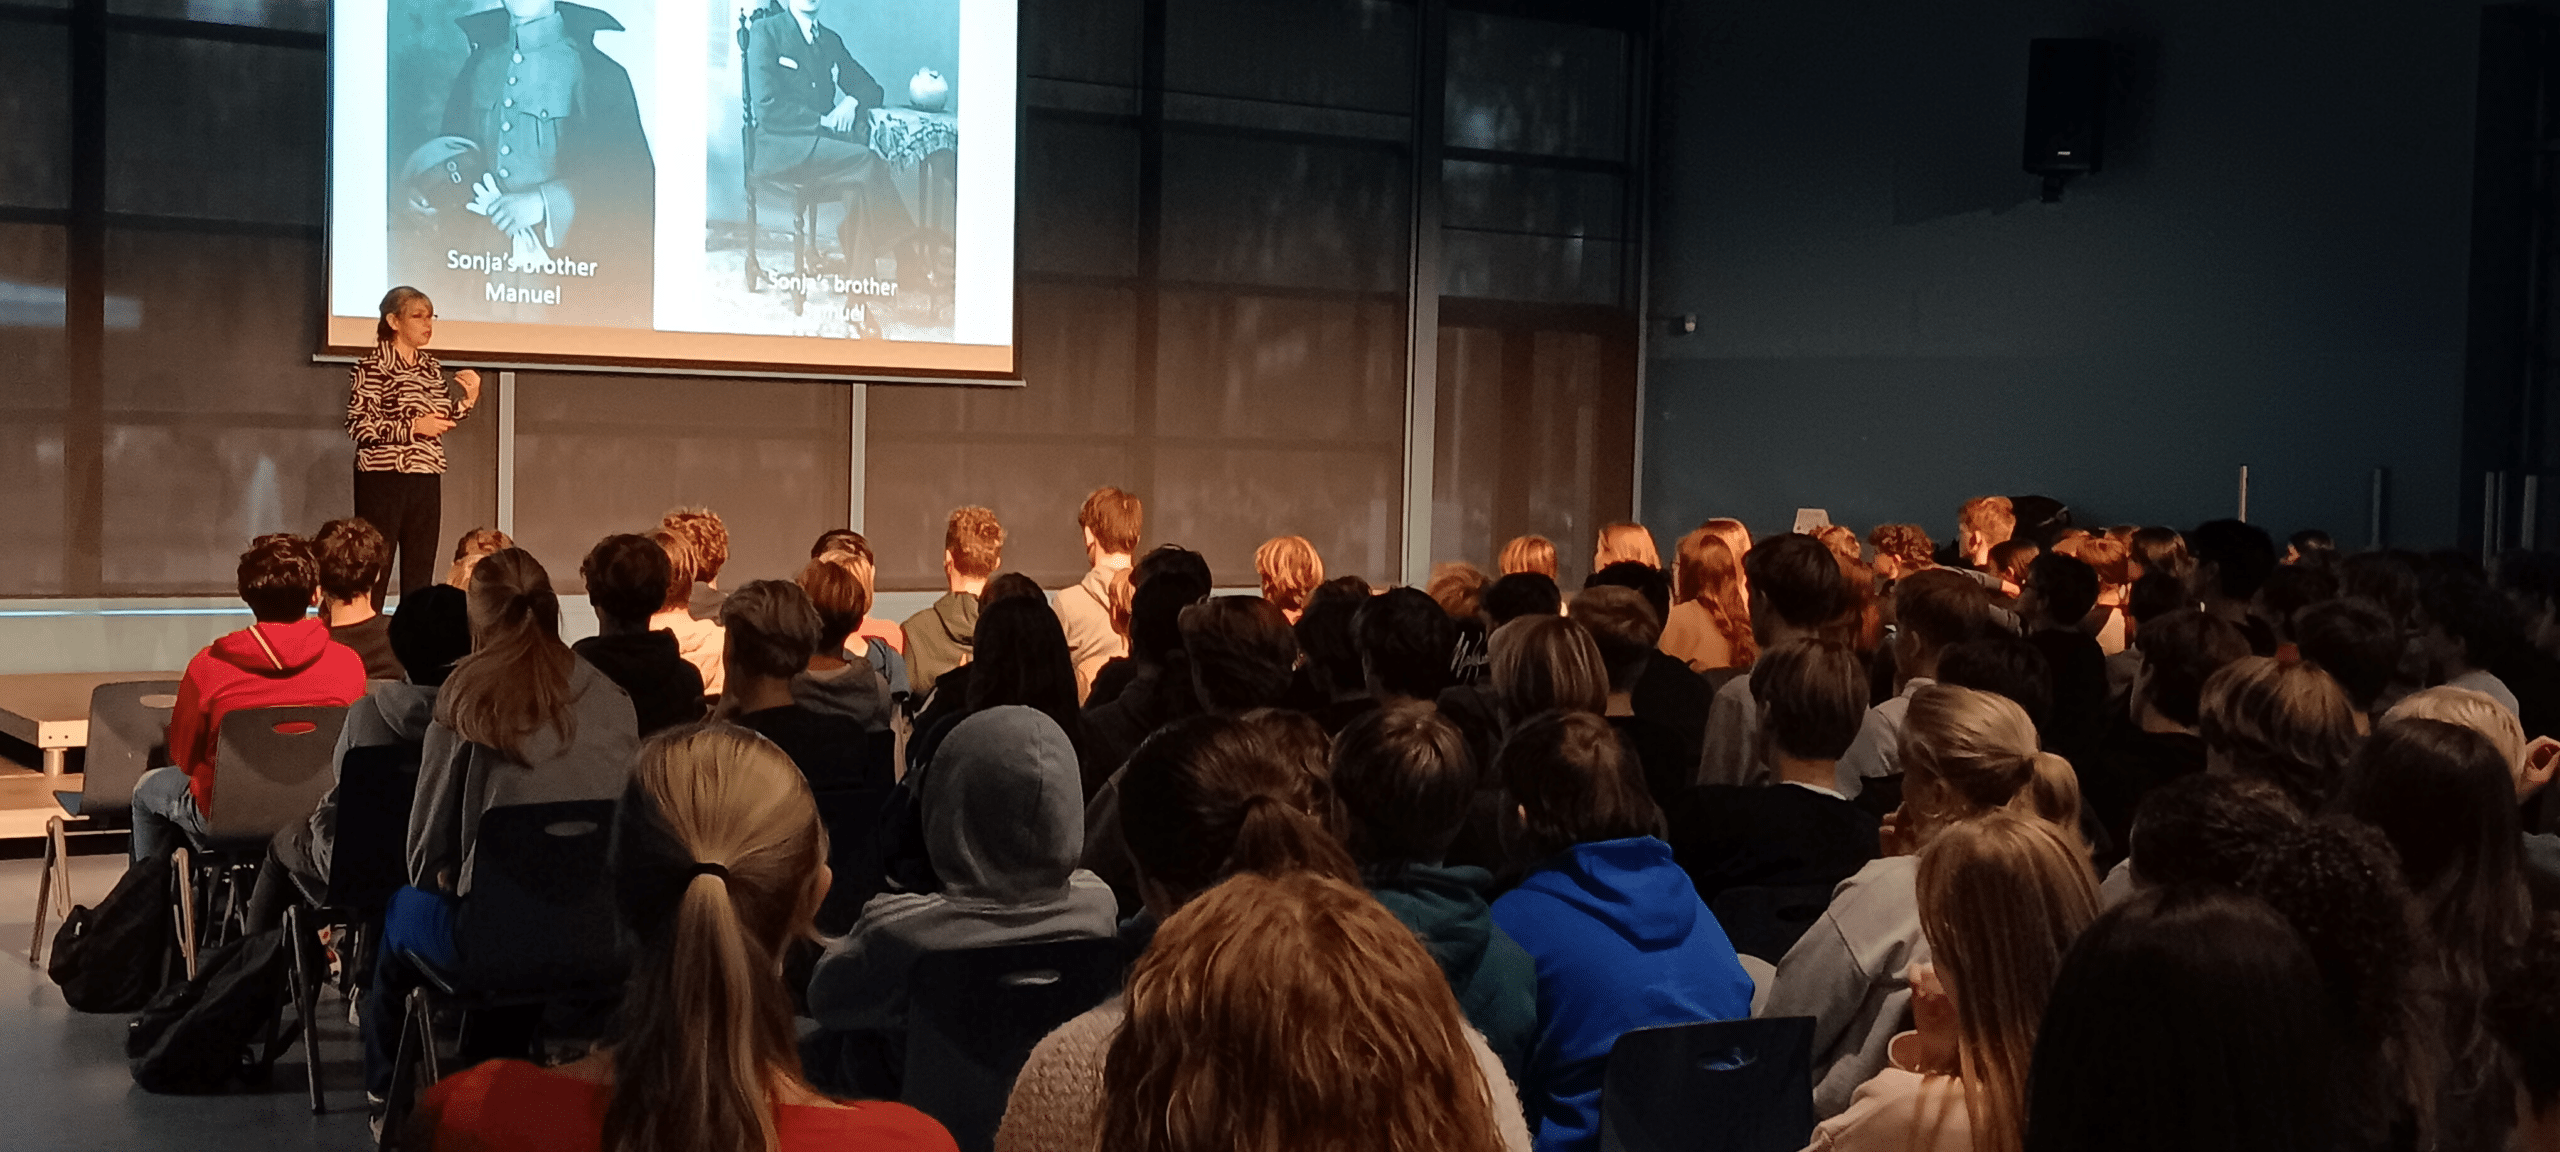 Roslyn Franken addressing a group of students in the Netherlands. Courtesy photo.